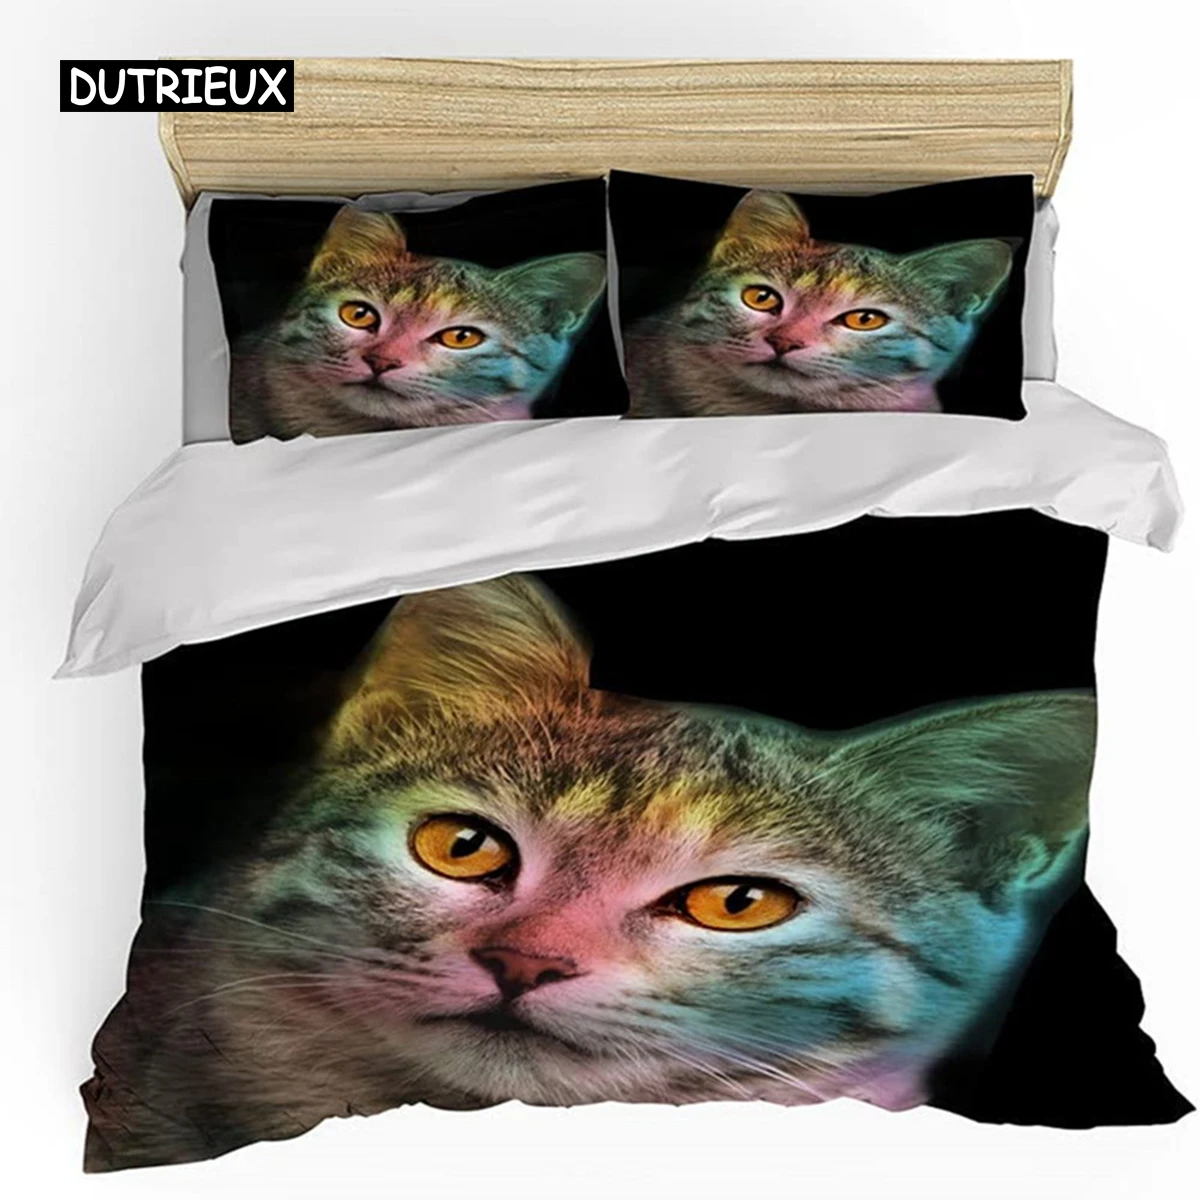 

Cute Cat Duvet Cover Twin Size 3D Animal Vivid Colorful Cat Printed Comforter Cover Soft Polyester Bedding Set for Adult Teens